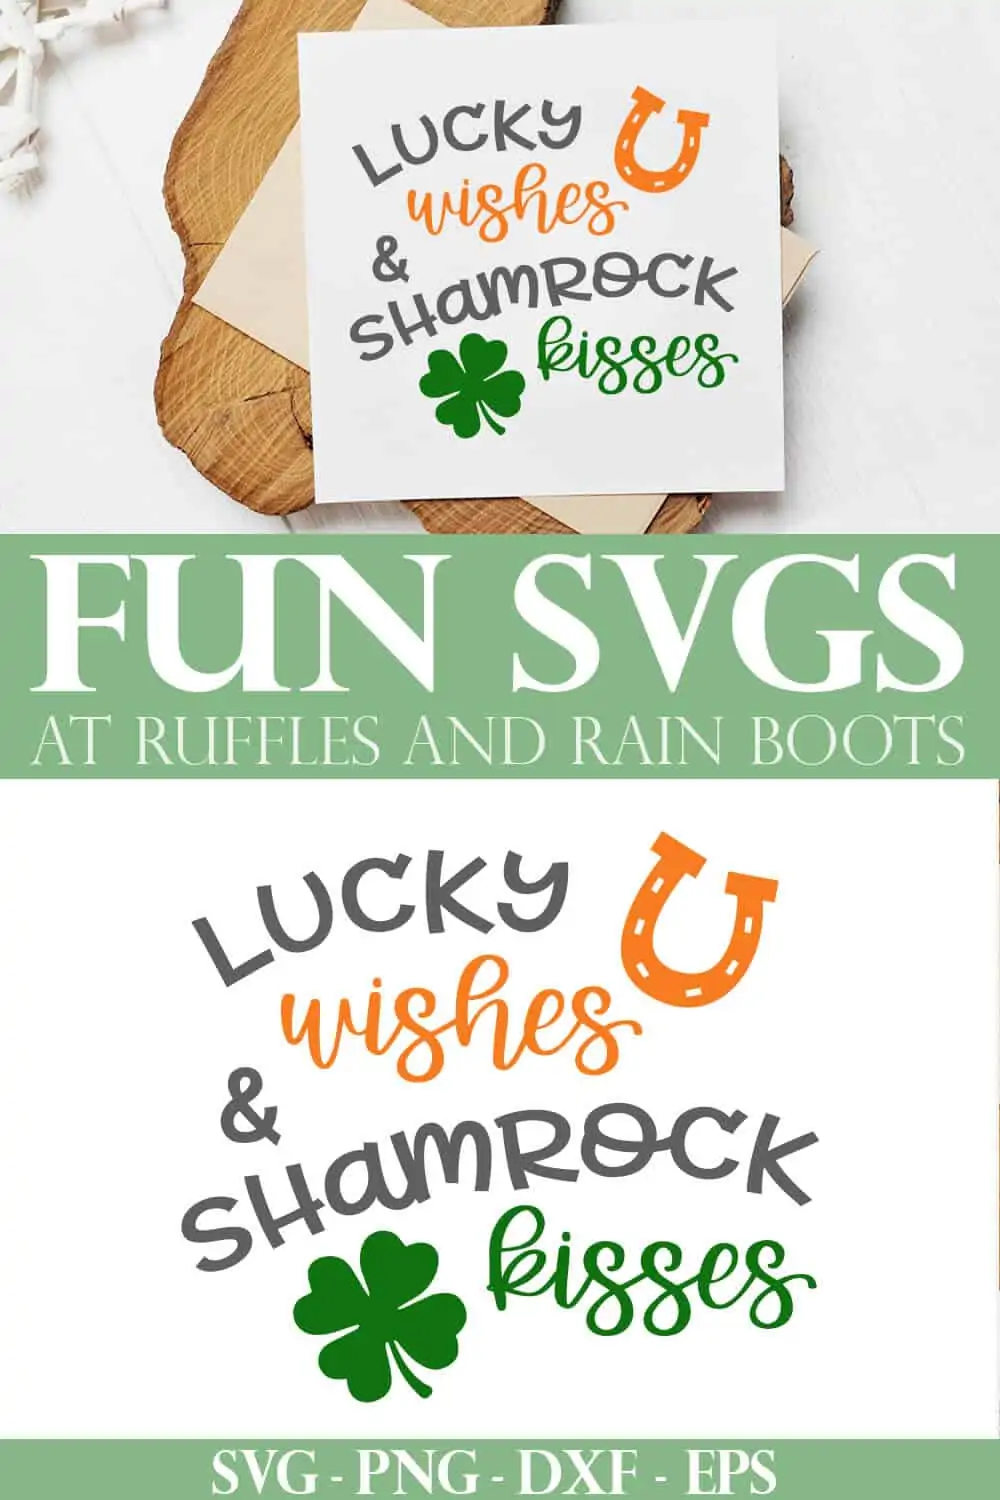 collage of lucky wishes and shamrock kisses svg on white card stock on wood plank